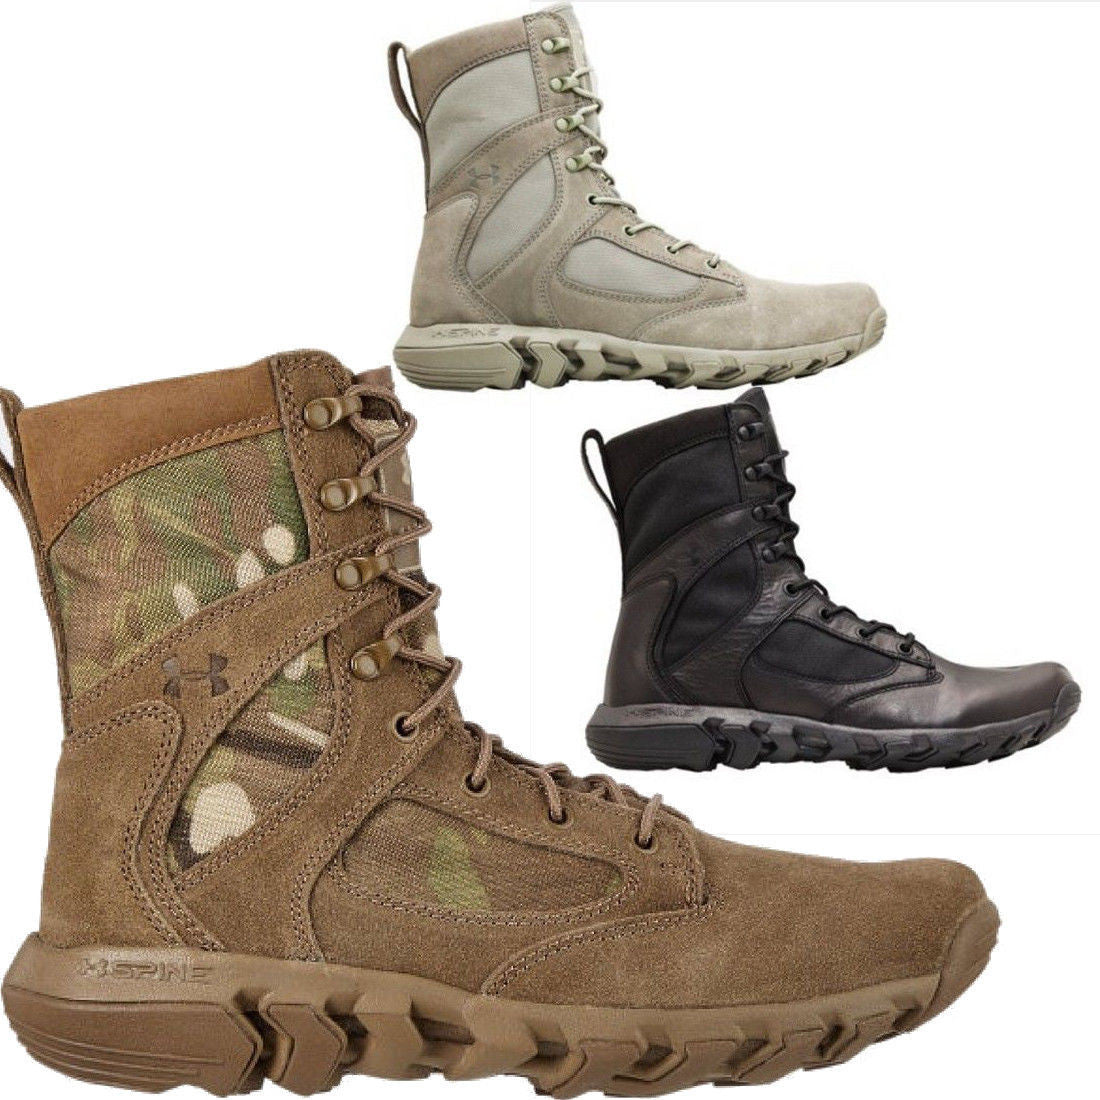 underarmour duty boots